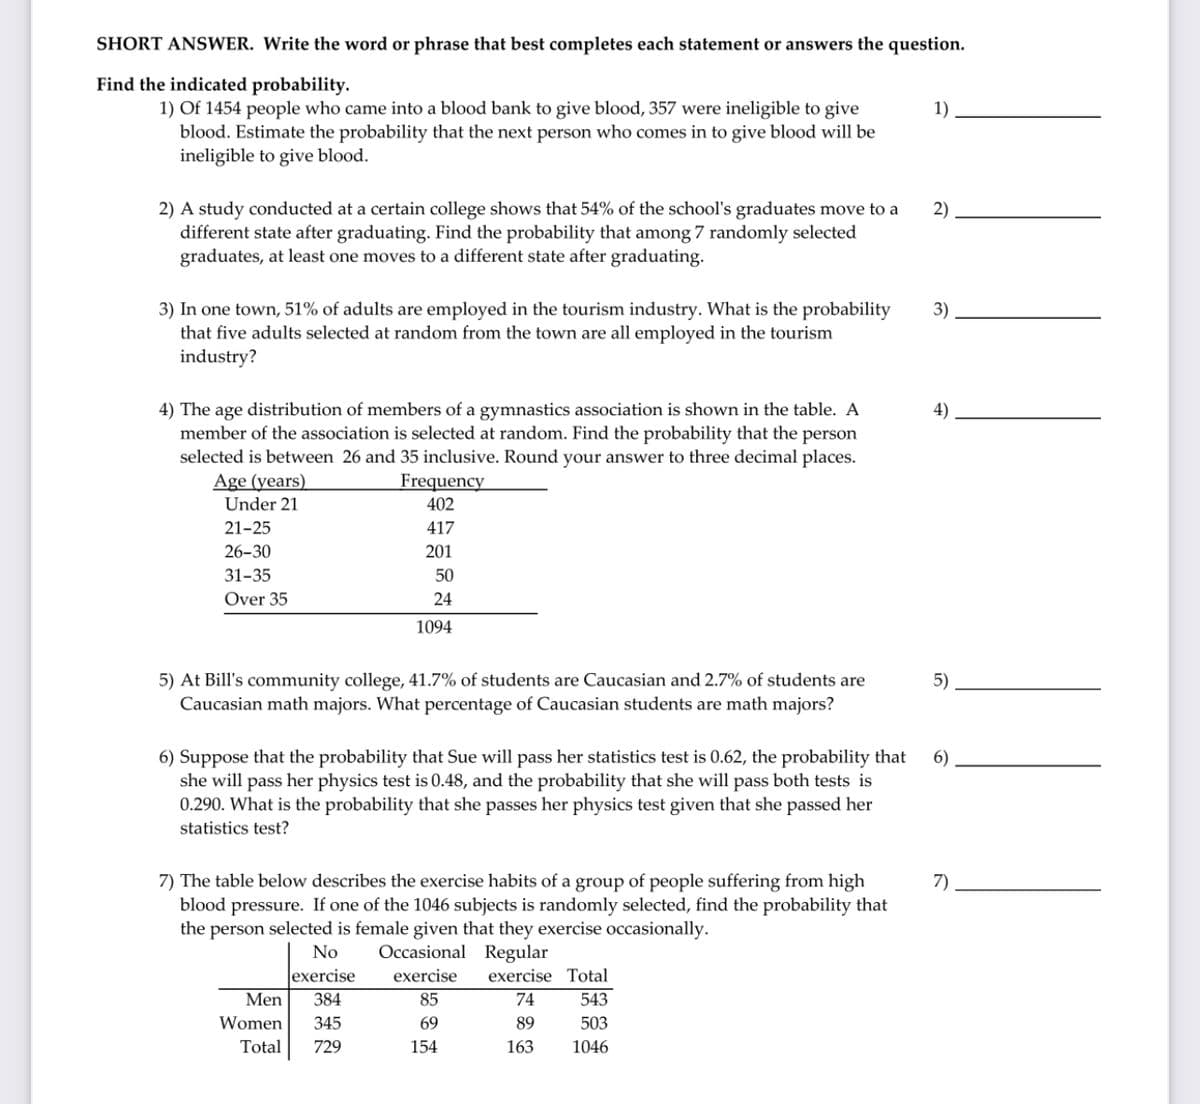 SHORT ANSWER. Write the word or phrase that best completes each statement or answers the question.
Find the indicated probability.
1) Of 1454 people who came into a blood bank to give blood, 357 were ineligible to give
blood. Estimate the probability that the next person who comes in to give blood will be
ineligible to give blood.
1)
2) A study conducted at a certain college shows that 54% of the school's graduates move to a
different state after graduating. Find the probability that among 7 randomly selected
graduates, at least one moves to a different state after graduating.
2)
3) In one town, 51% of adults are employed in the tourism industry. What is the probability
that five adults selected at random from the town are all employed in the tourism
industry?
3)
4) The age distribution of members of a gymnastics association is shown in the table. A
the person
selected is between 26 and 35 inclusive. Round your answer to three decimal places.
4)
member of the association is selected at random. Fir
the probability
Age (years)
Frequency
Under 21
402
21-25
417
26-30
201
31-35
50
Over 35
24
1094
5) At Bill's community college, 41.7% of students are Caucasian and 2.7% of students are
Caucasian math majors. What percentage of Caucasian students are math majors?
5)
6) Suppose that the probability that Sue will pass her statistics test is 0.62, the probability that
she will pass her physics test is 0.48, and the probability that she will pass both tests is
0.290. What is the probability that she passes her physics test given that she passed her
6)
statistics test?
7) The table below describes the exercise habits of a group of people suffering from high
blood pressure. If one of the 1046 subjects is randomly selected, find the probability that
the person selected is female given that they exercise occasionally.
7)
No
Occasional Regular
exercise
exercise
exercise Total
Men
384
85
74
543
Women
345
69
89
503
Total
729
154
163
1046
